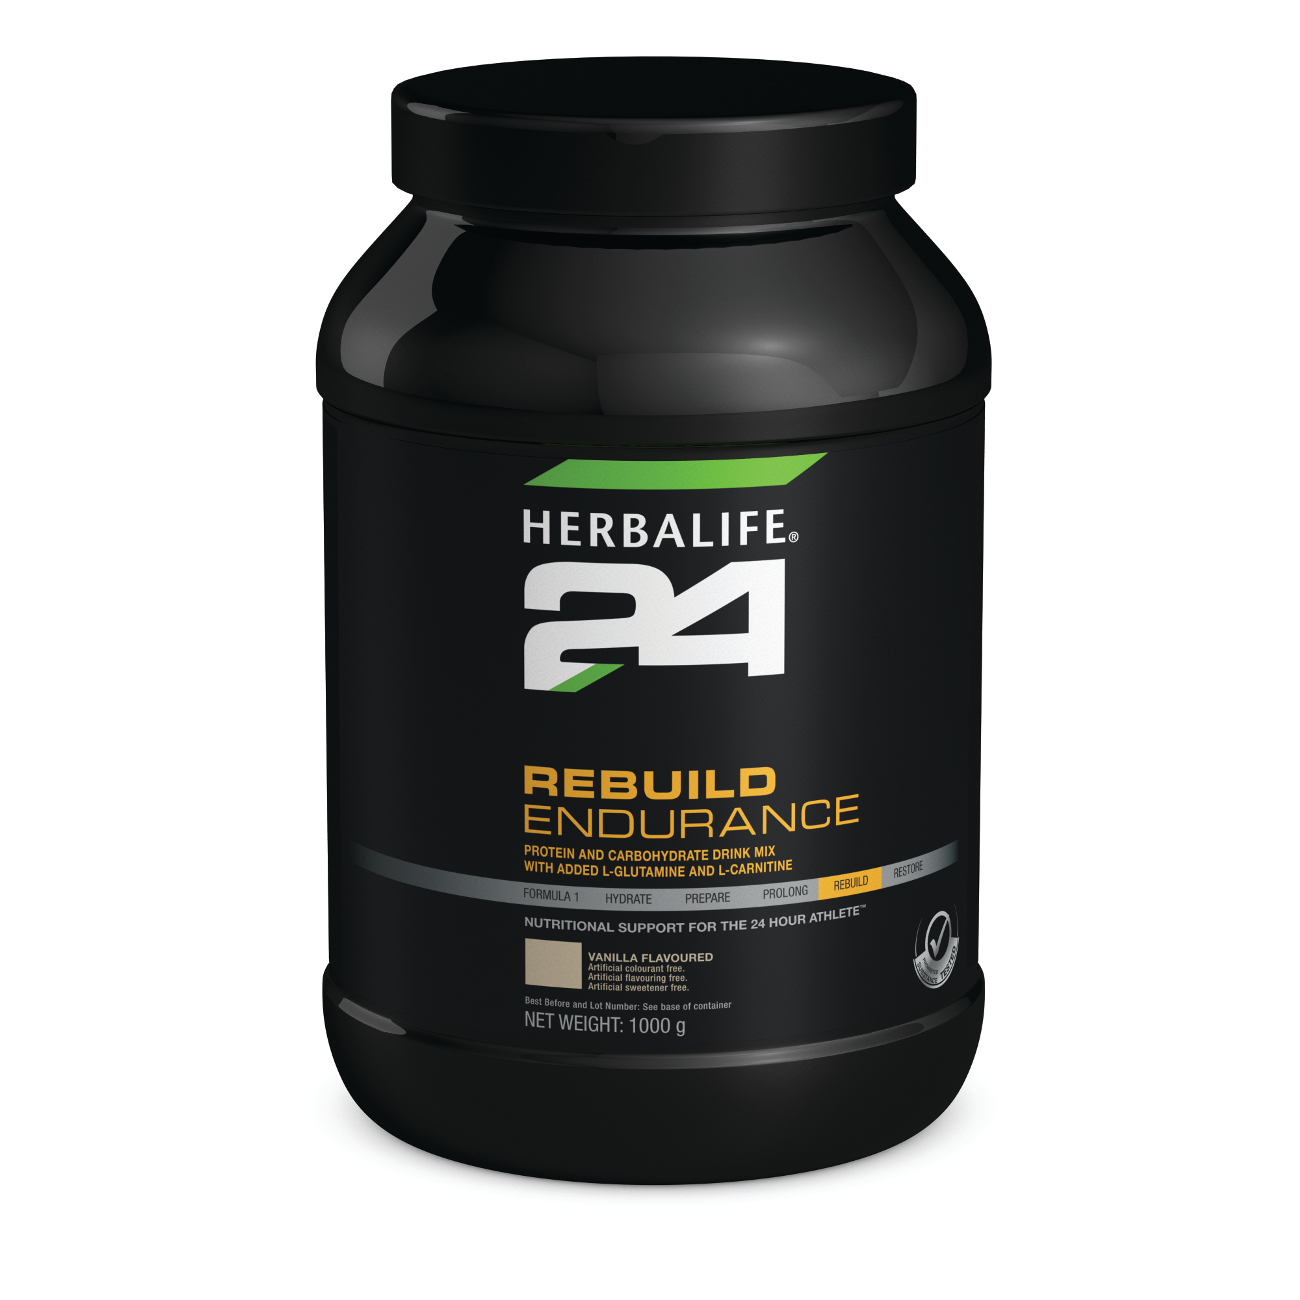 Herbalife24Â® Rebuild Endurance Protein-Carbohydrate Drink Mix Vanilla Flavoured product shot